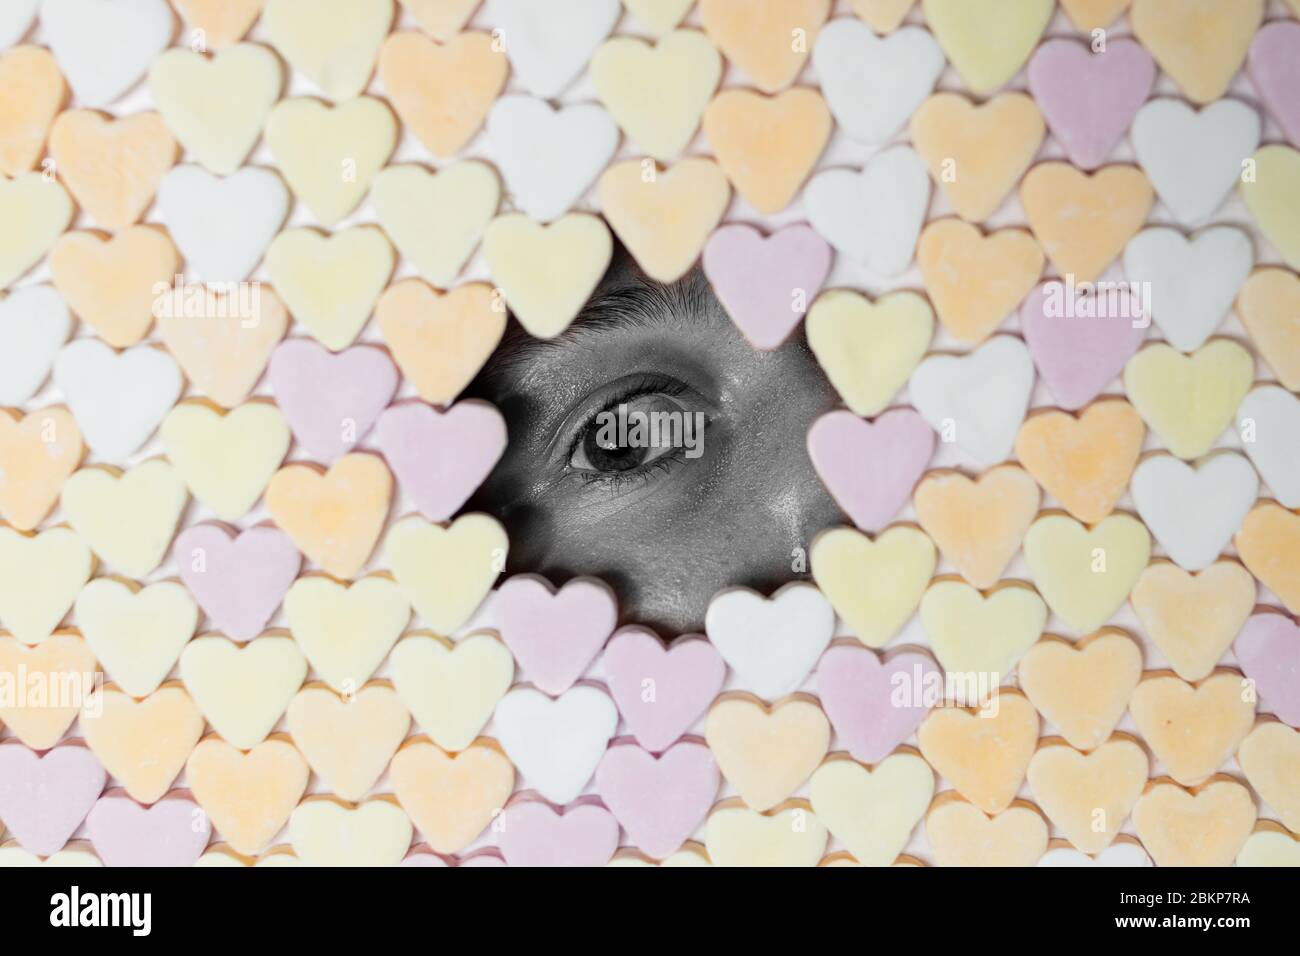 Girl looking through hole in wall of heart-shaped sweets. Black and white face. Royalty free stock photo. Stock Photo